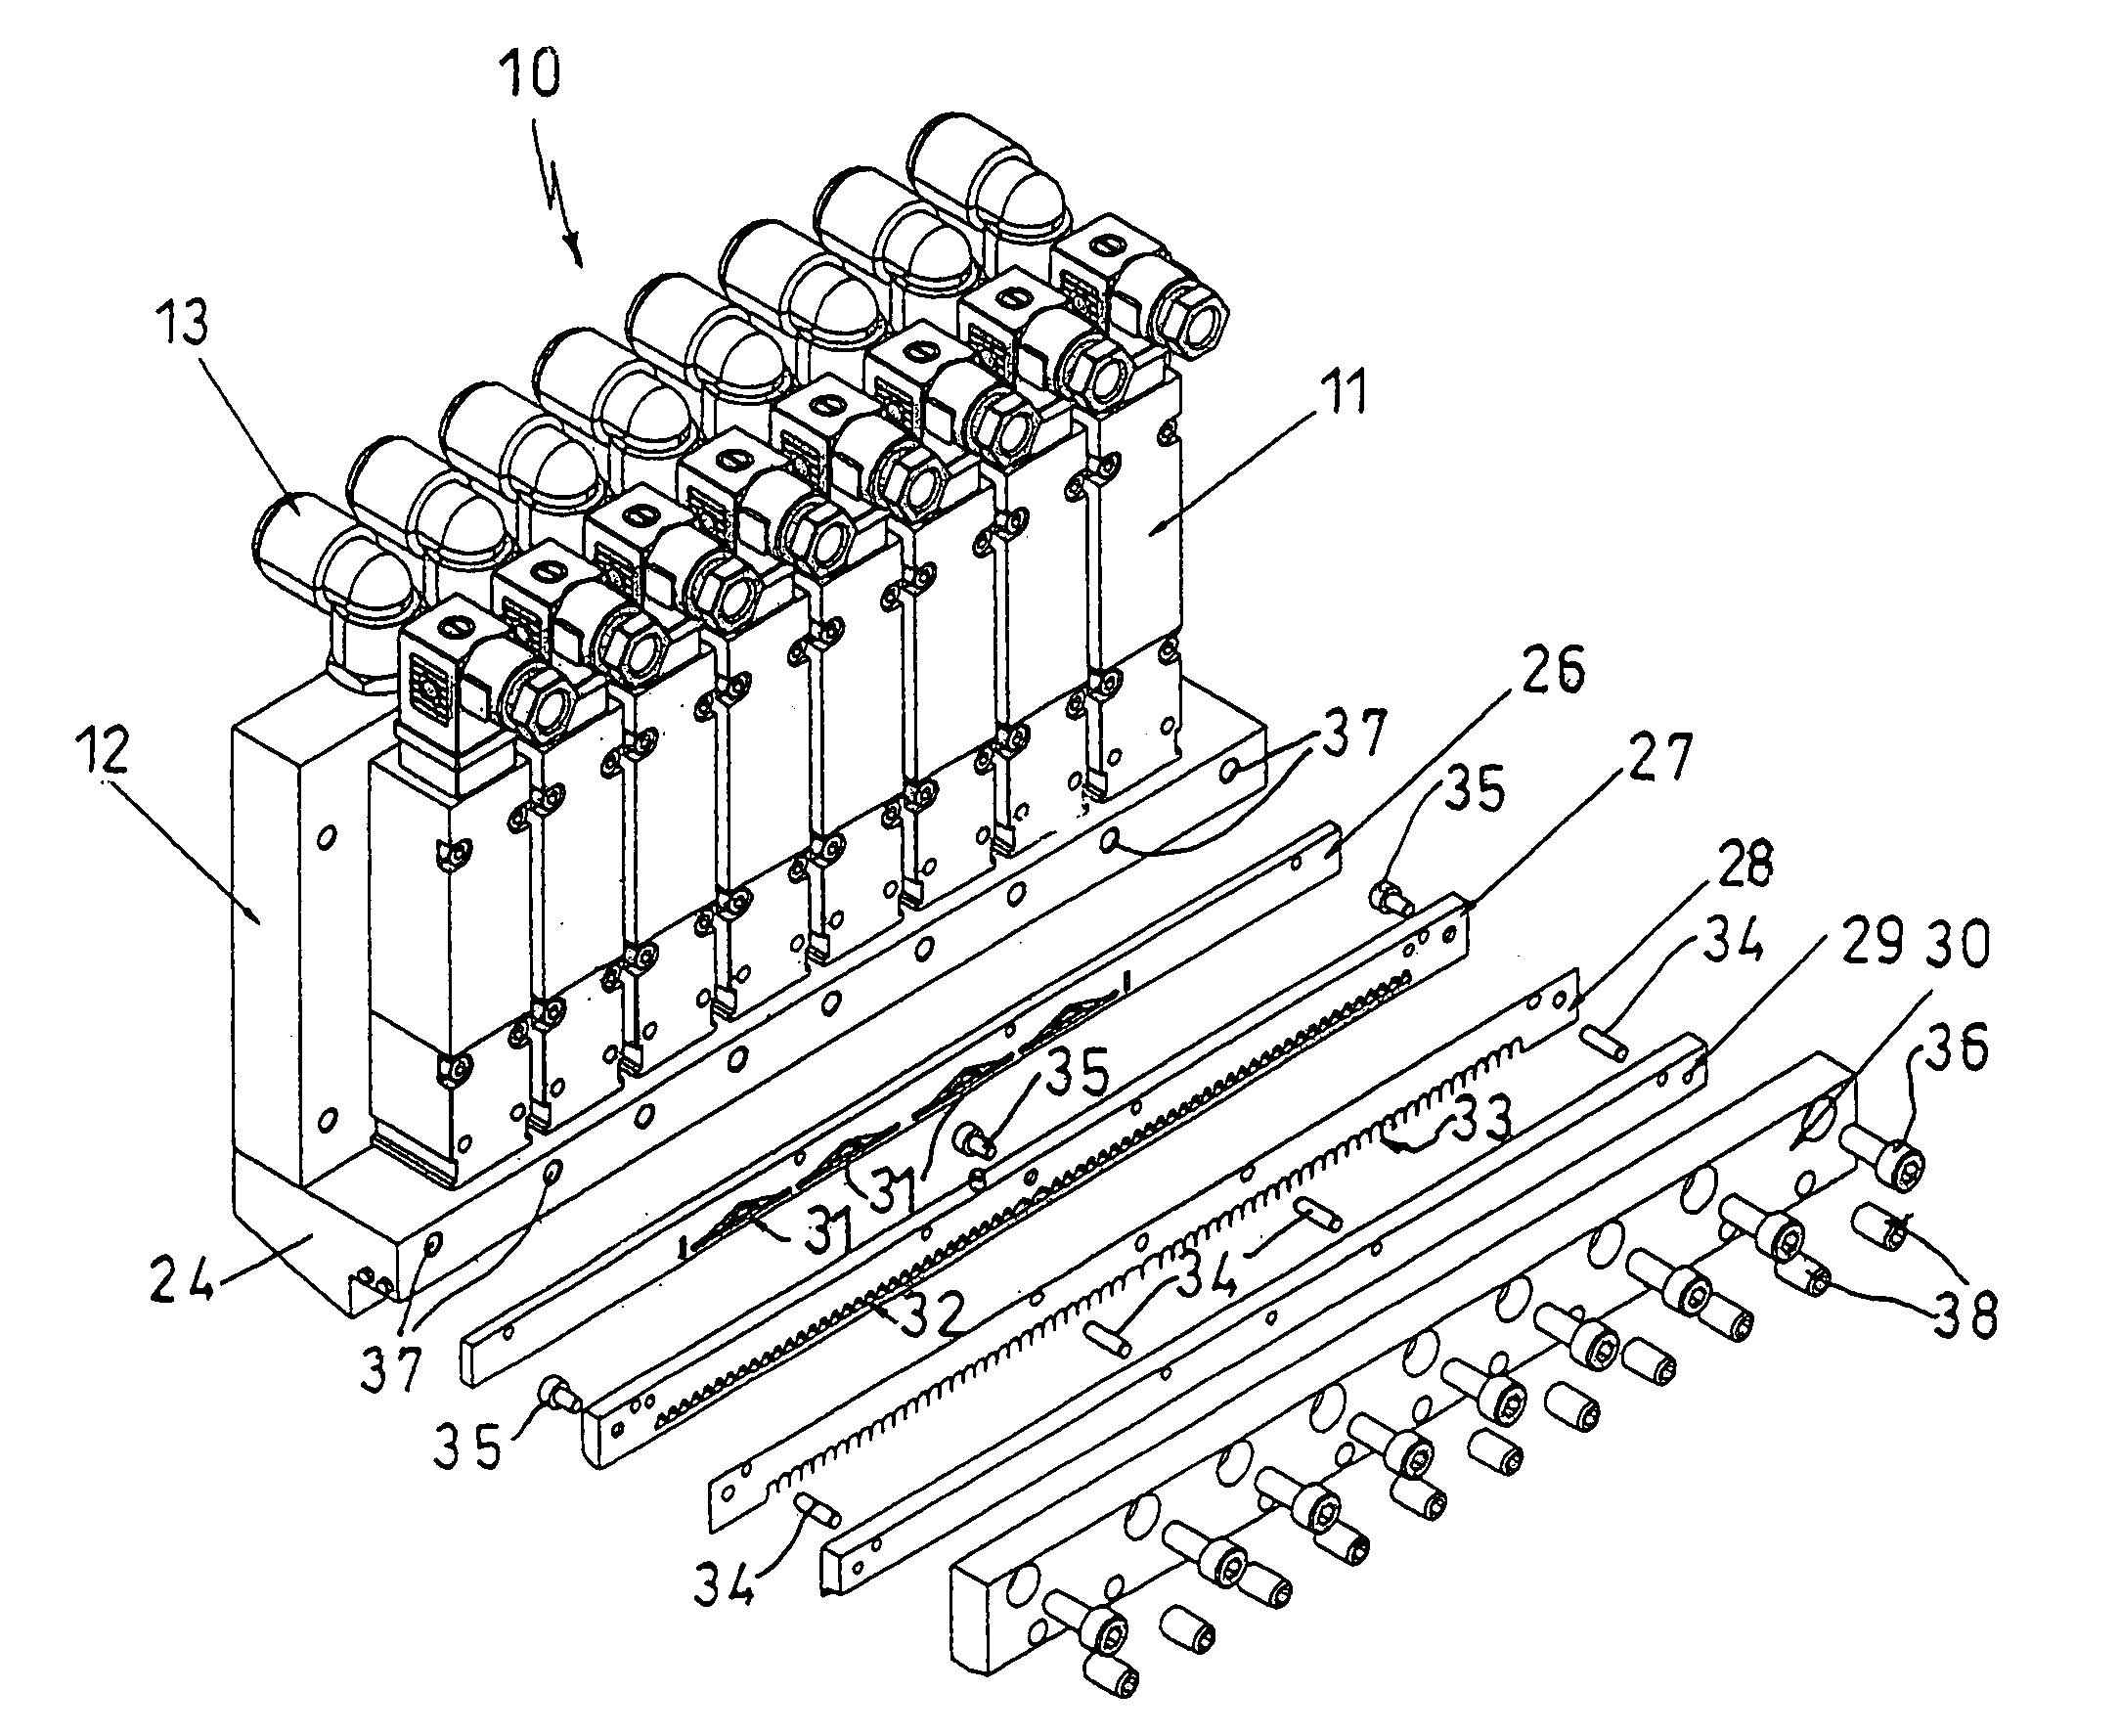 Device for surface coating of viscose media